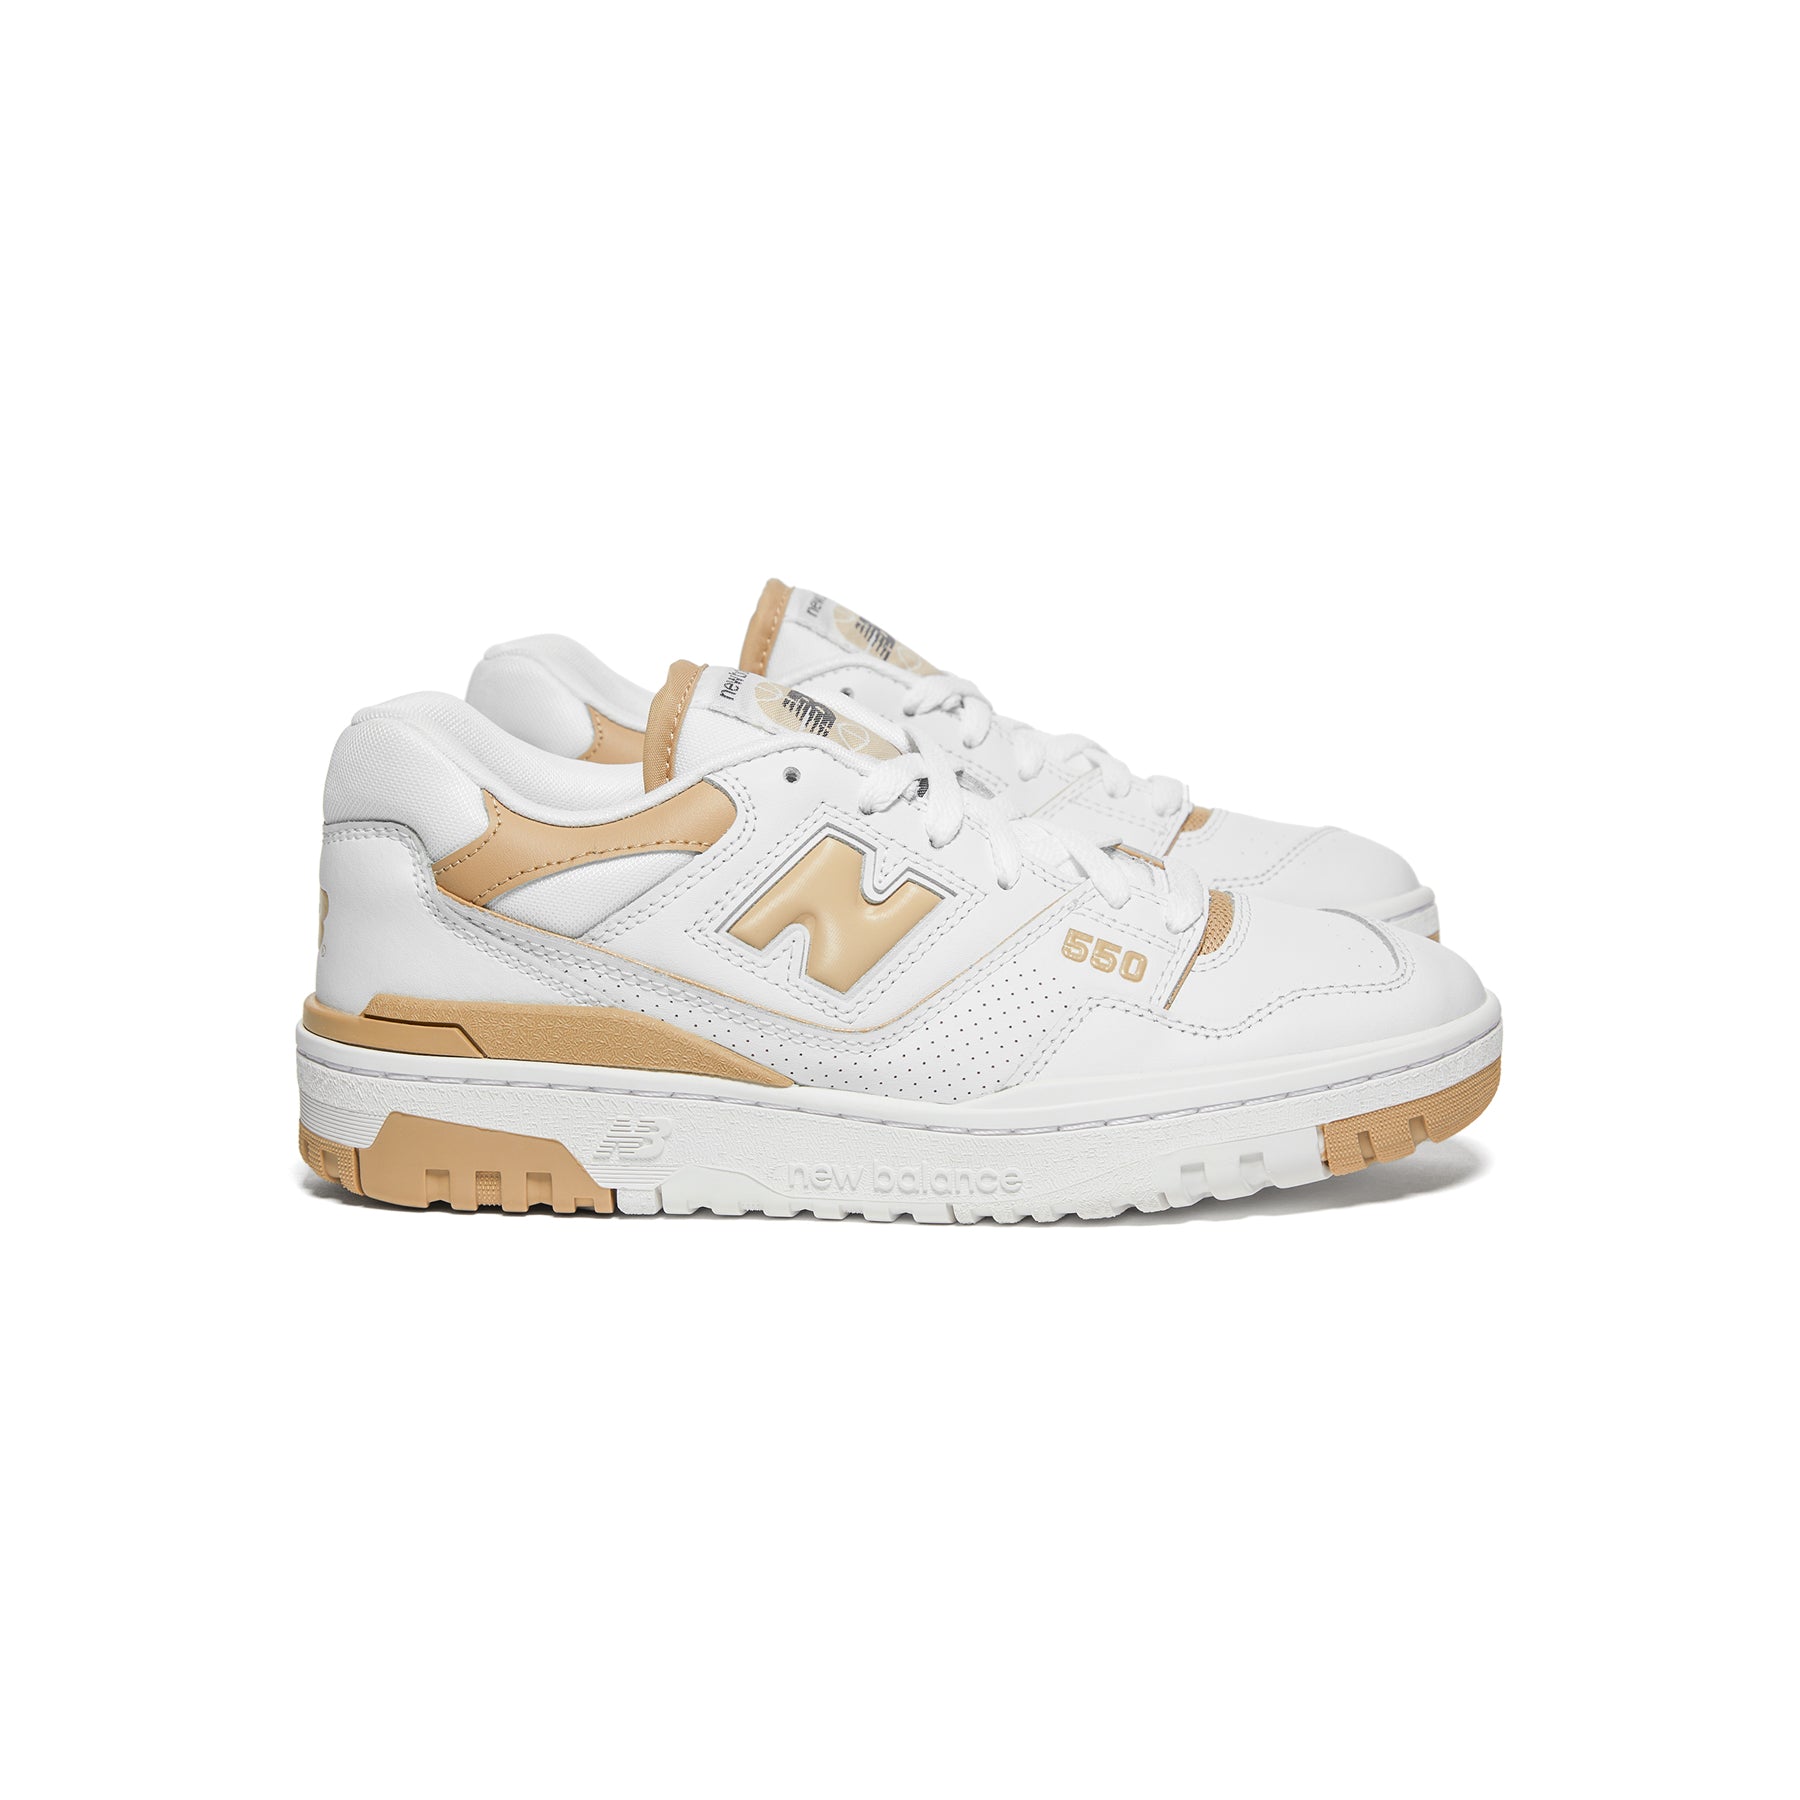 geld De vreemdeling anders New Balance Womens 550 (White/Sand) – Concepts